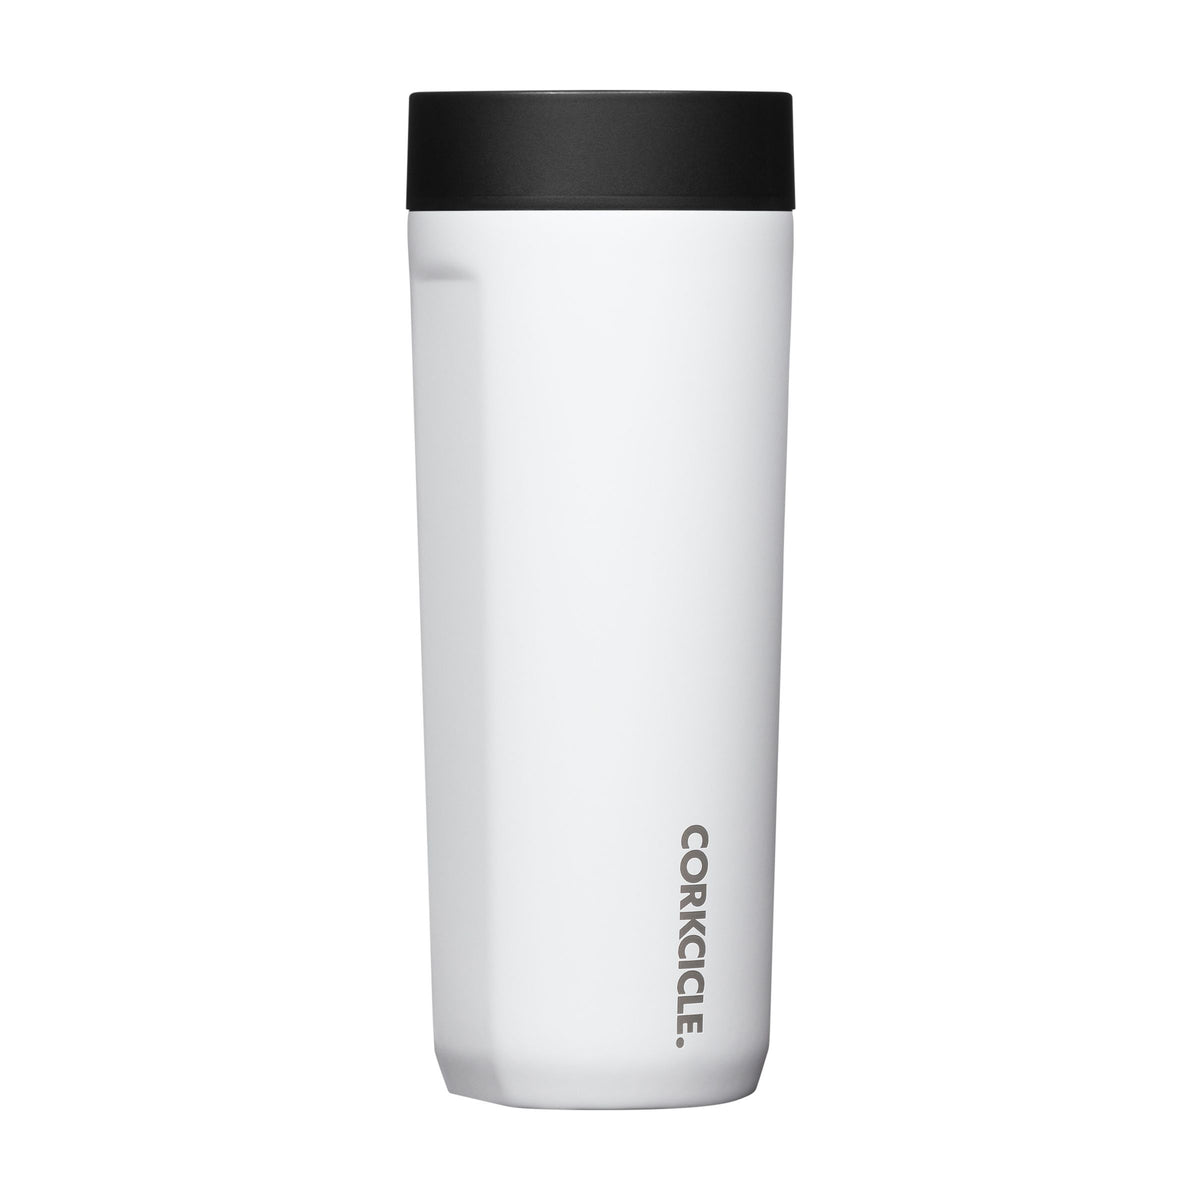 CORKCICLE - Commuter Cup Gloss White 17 oz